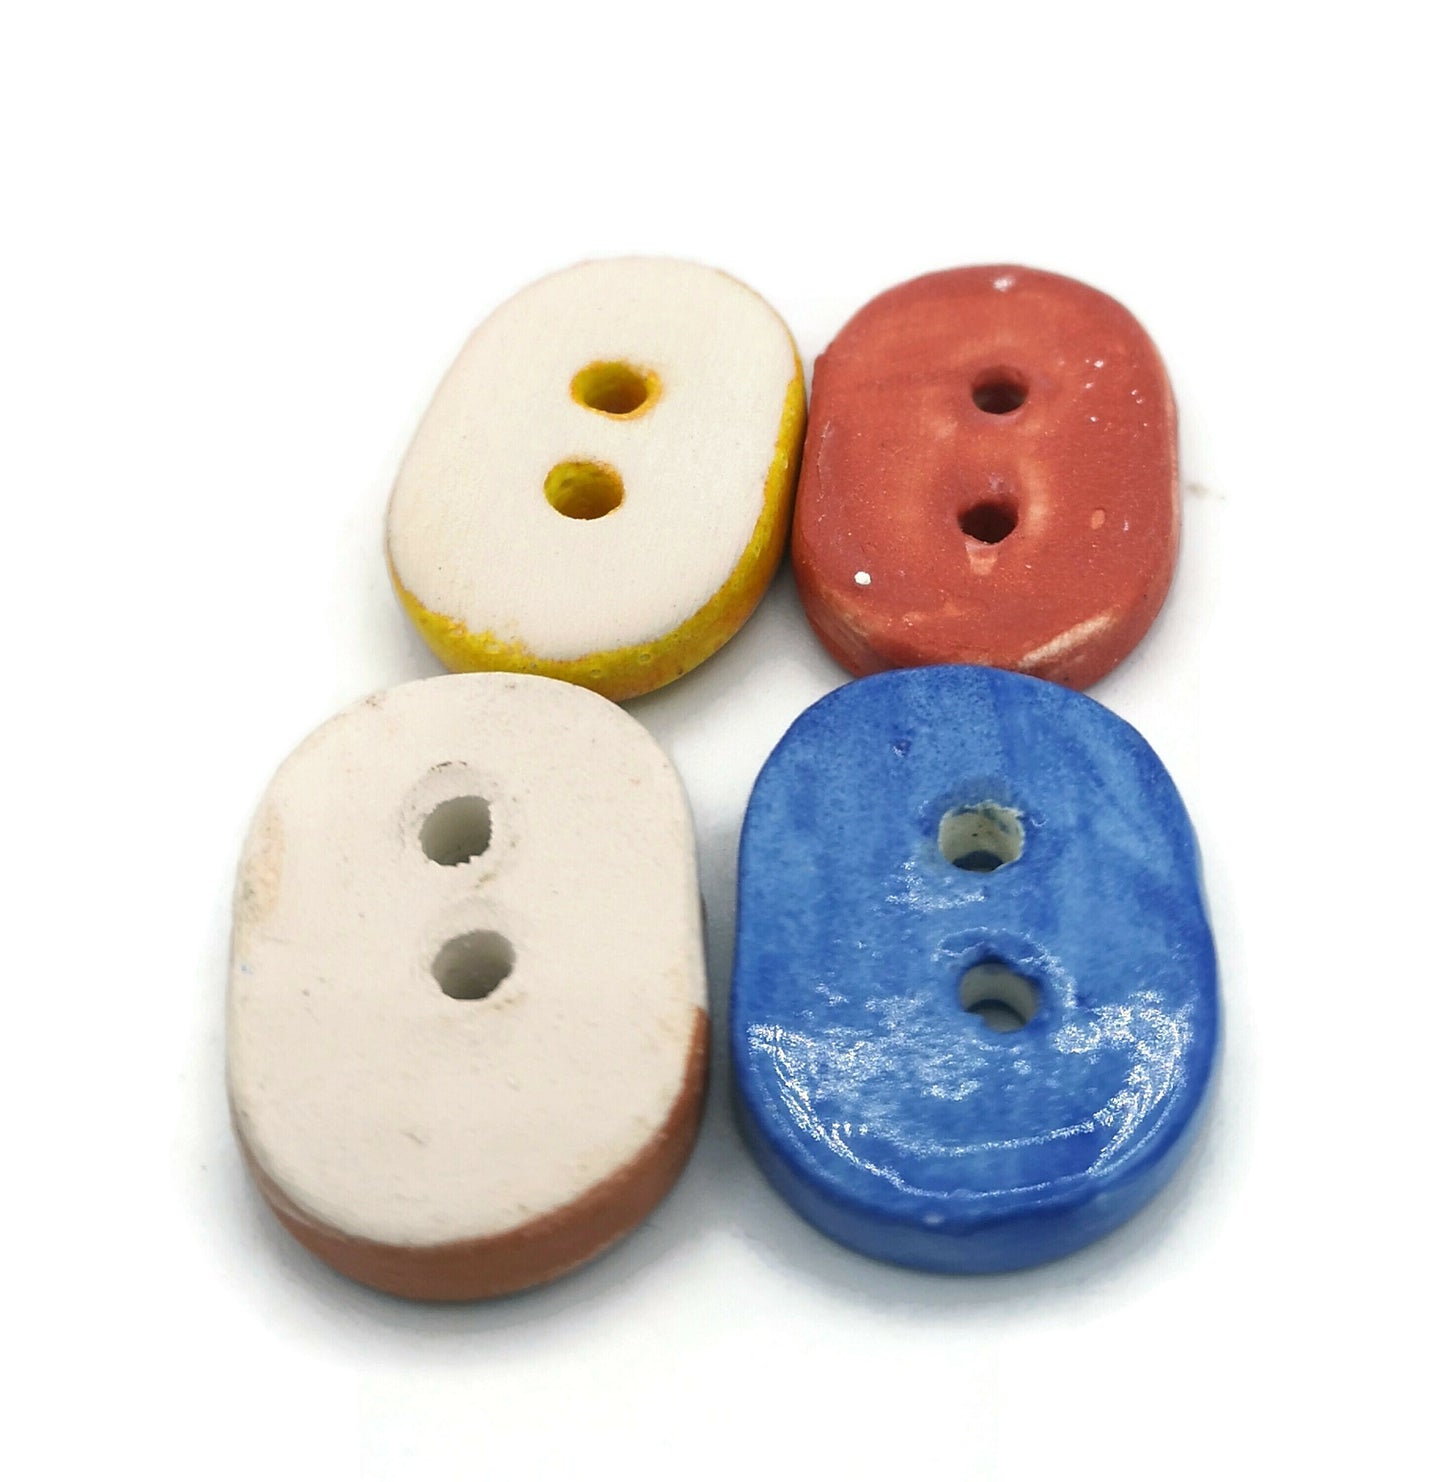 4Pc Oval Sewing Buttons Lot, Cute Big Buttons For Jewelry Making, Best Sellers Sewing Supplies And Notions, Unique Buttons For Crafts - Ceramica Ana Rafael